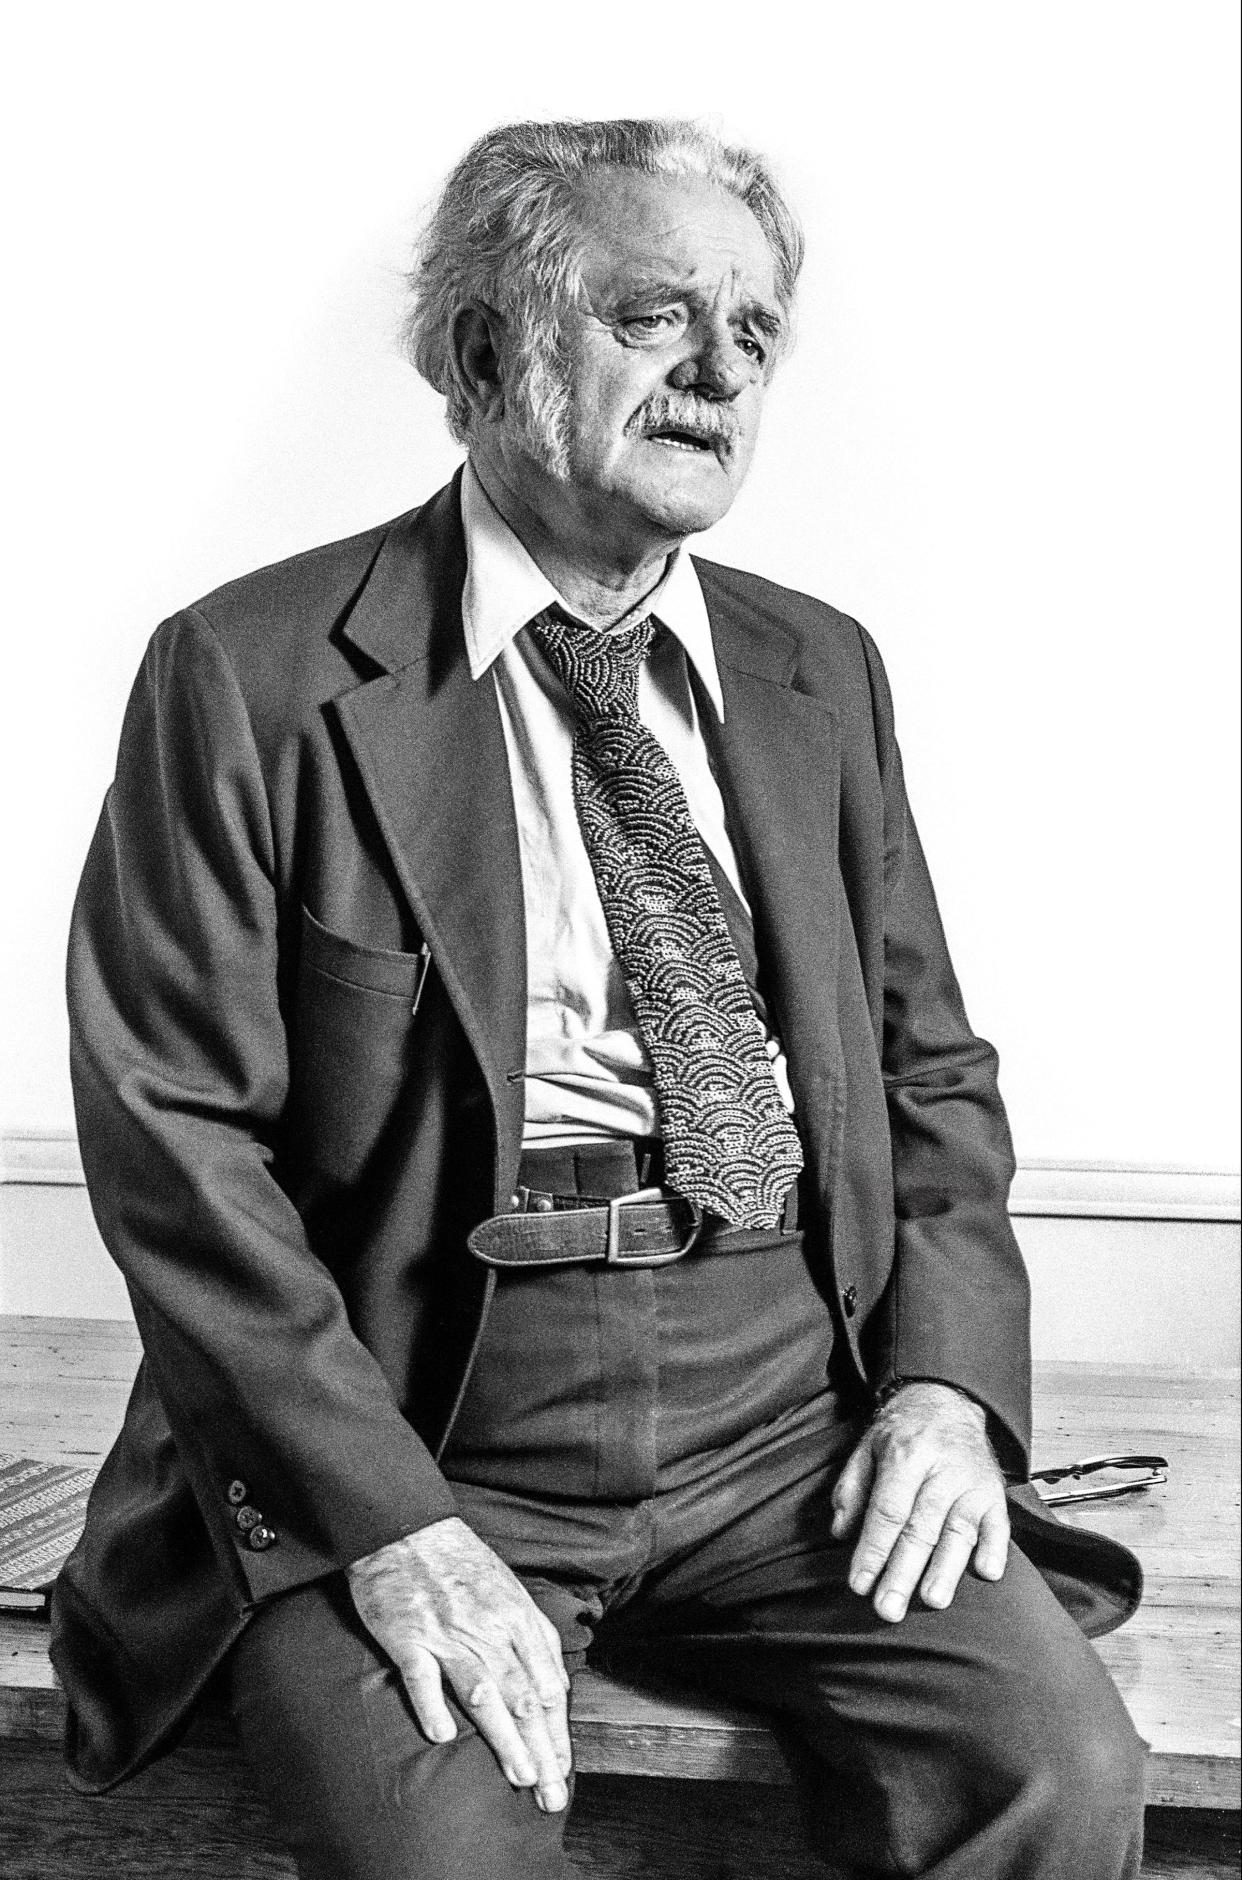 A 1975 photo of Kenneth Rexroth at the Santa Fe Poetry Festival, by Joey Tranchina is part of the “Beatitude: The Beat Attitude” exhibit through Jan. 6 at the Palm Beach Photographic Centre in West Palm Beach.